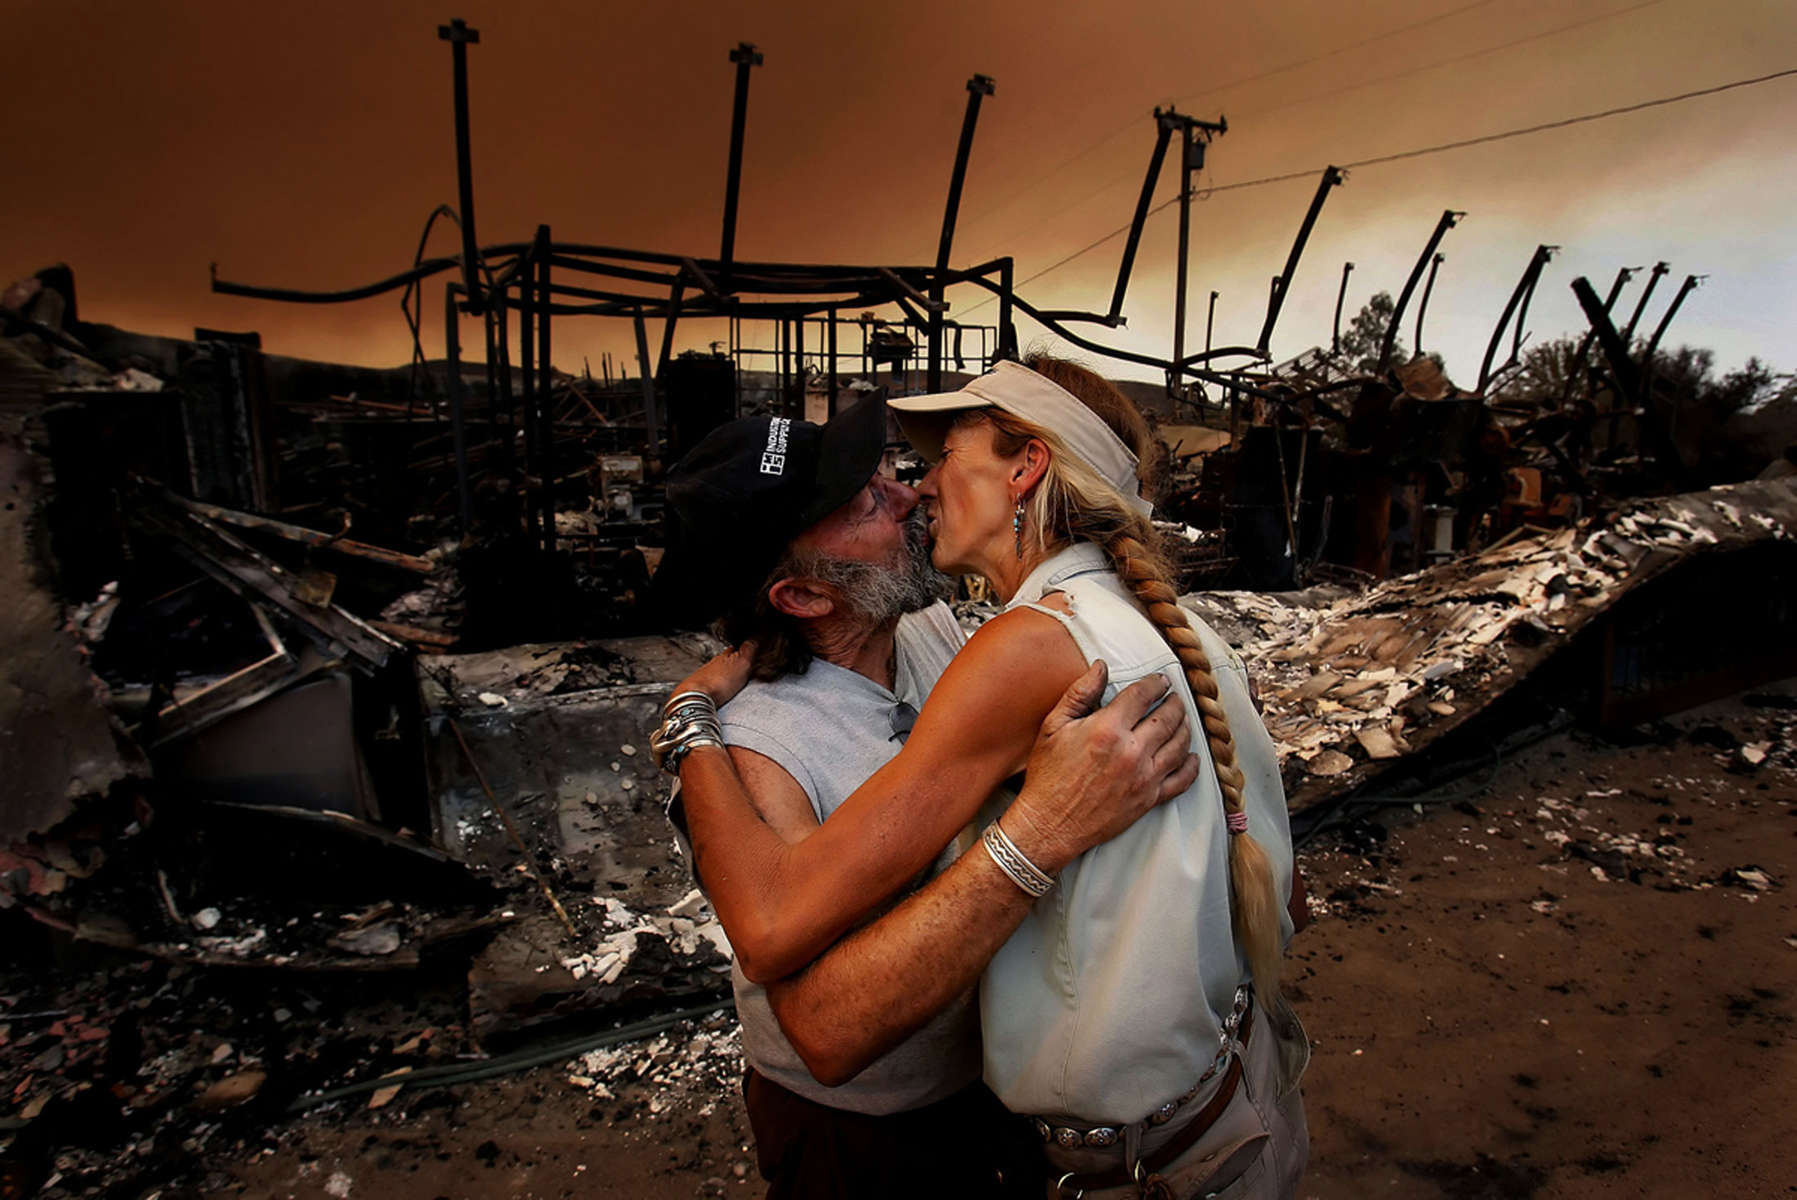 Bruce Milne, left, comforts his wife, Melanie, after his metal shop was destroyed by the Sawtooth Fire. Their home on Lariat Trail was spared by the fire storm that hit Pioneertown in Yucca Valley, Calif. The firedestroyed more than 50 homes and buildings. (The Press-Enterprise/ Mark Zaleski)